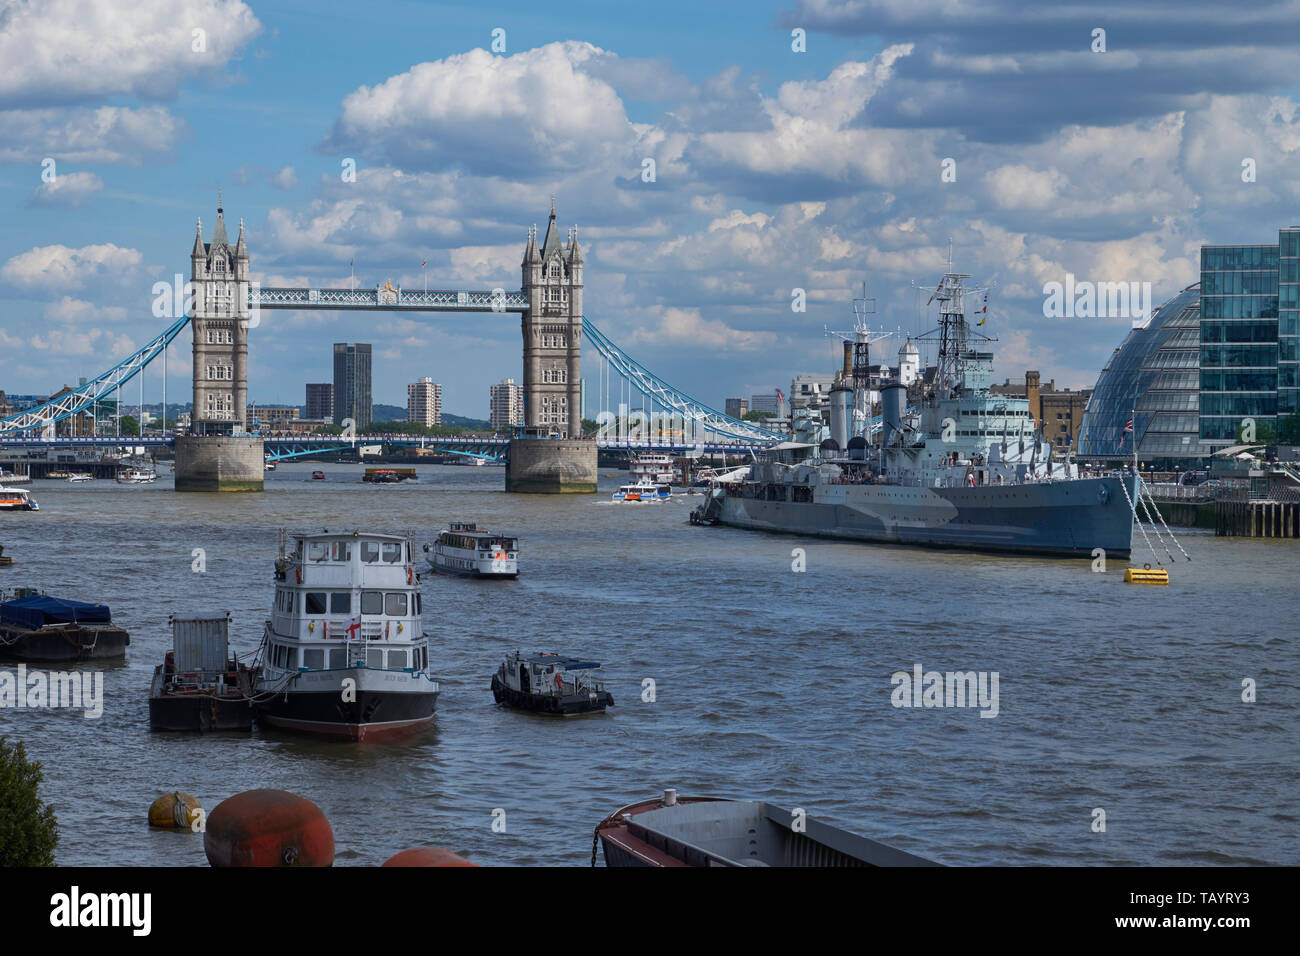 City of London: Tower Bridge (completed 1894 to designs by Barry & Brunel),  HMS Belfast (Second World War light cruiser built for the Royal Navy) and Stock Photo